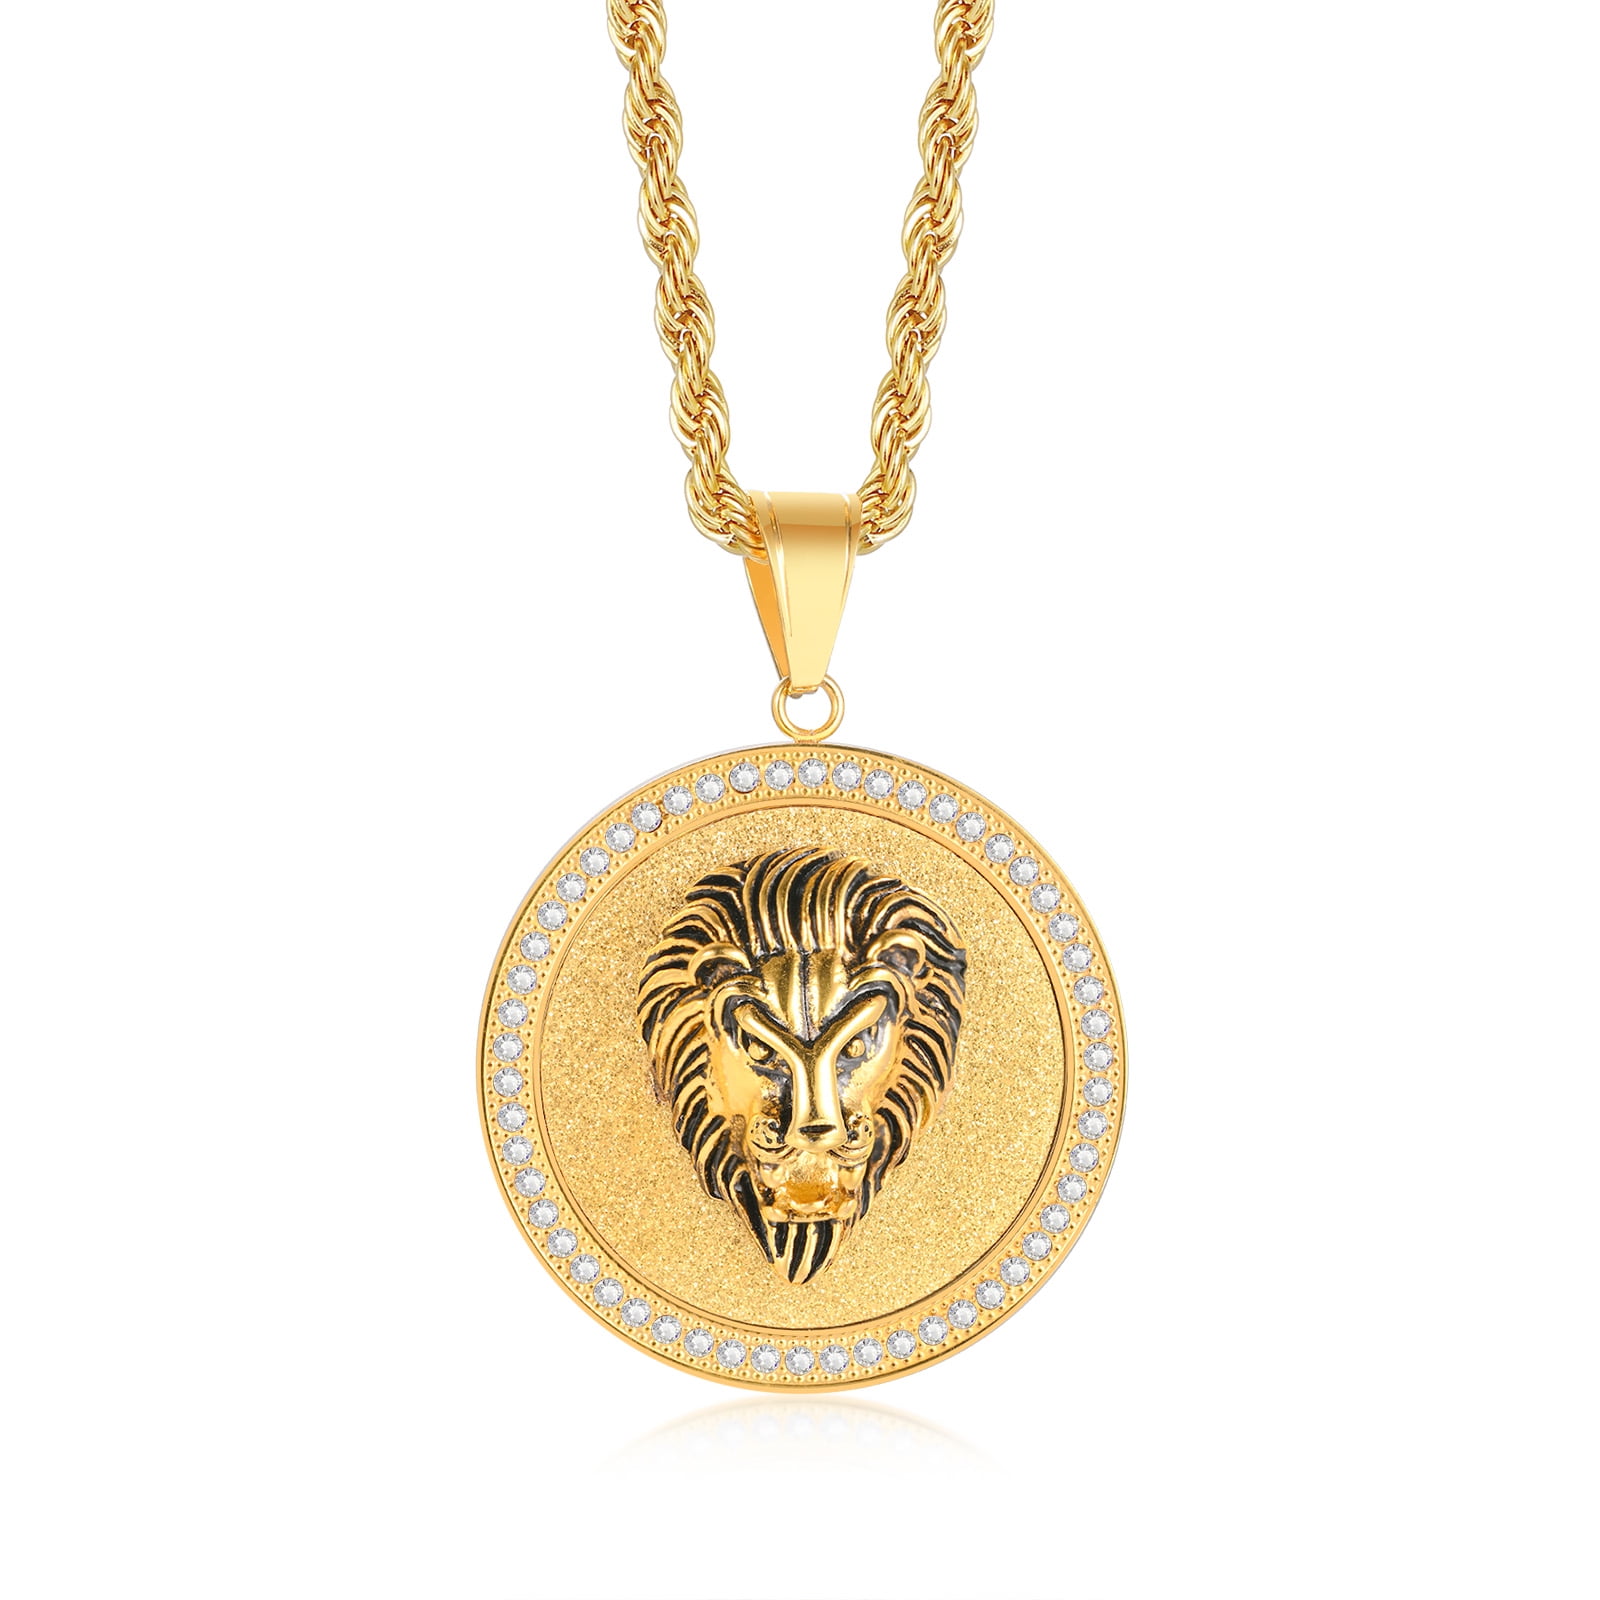 New Stainless Steel Lion Head Round Shape Pendant & 24" Round Box Chain Necklace